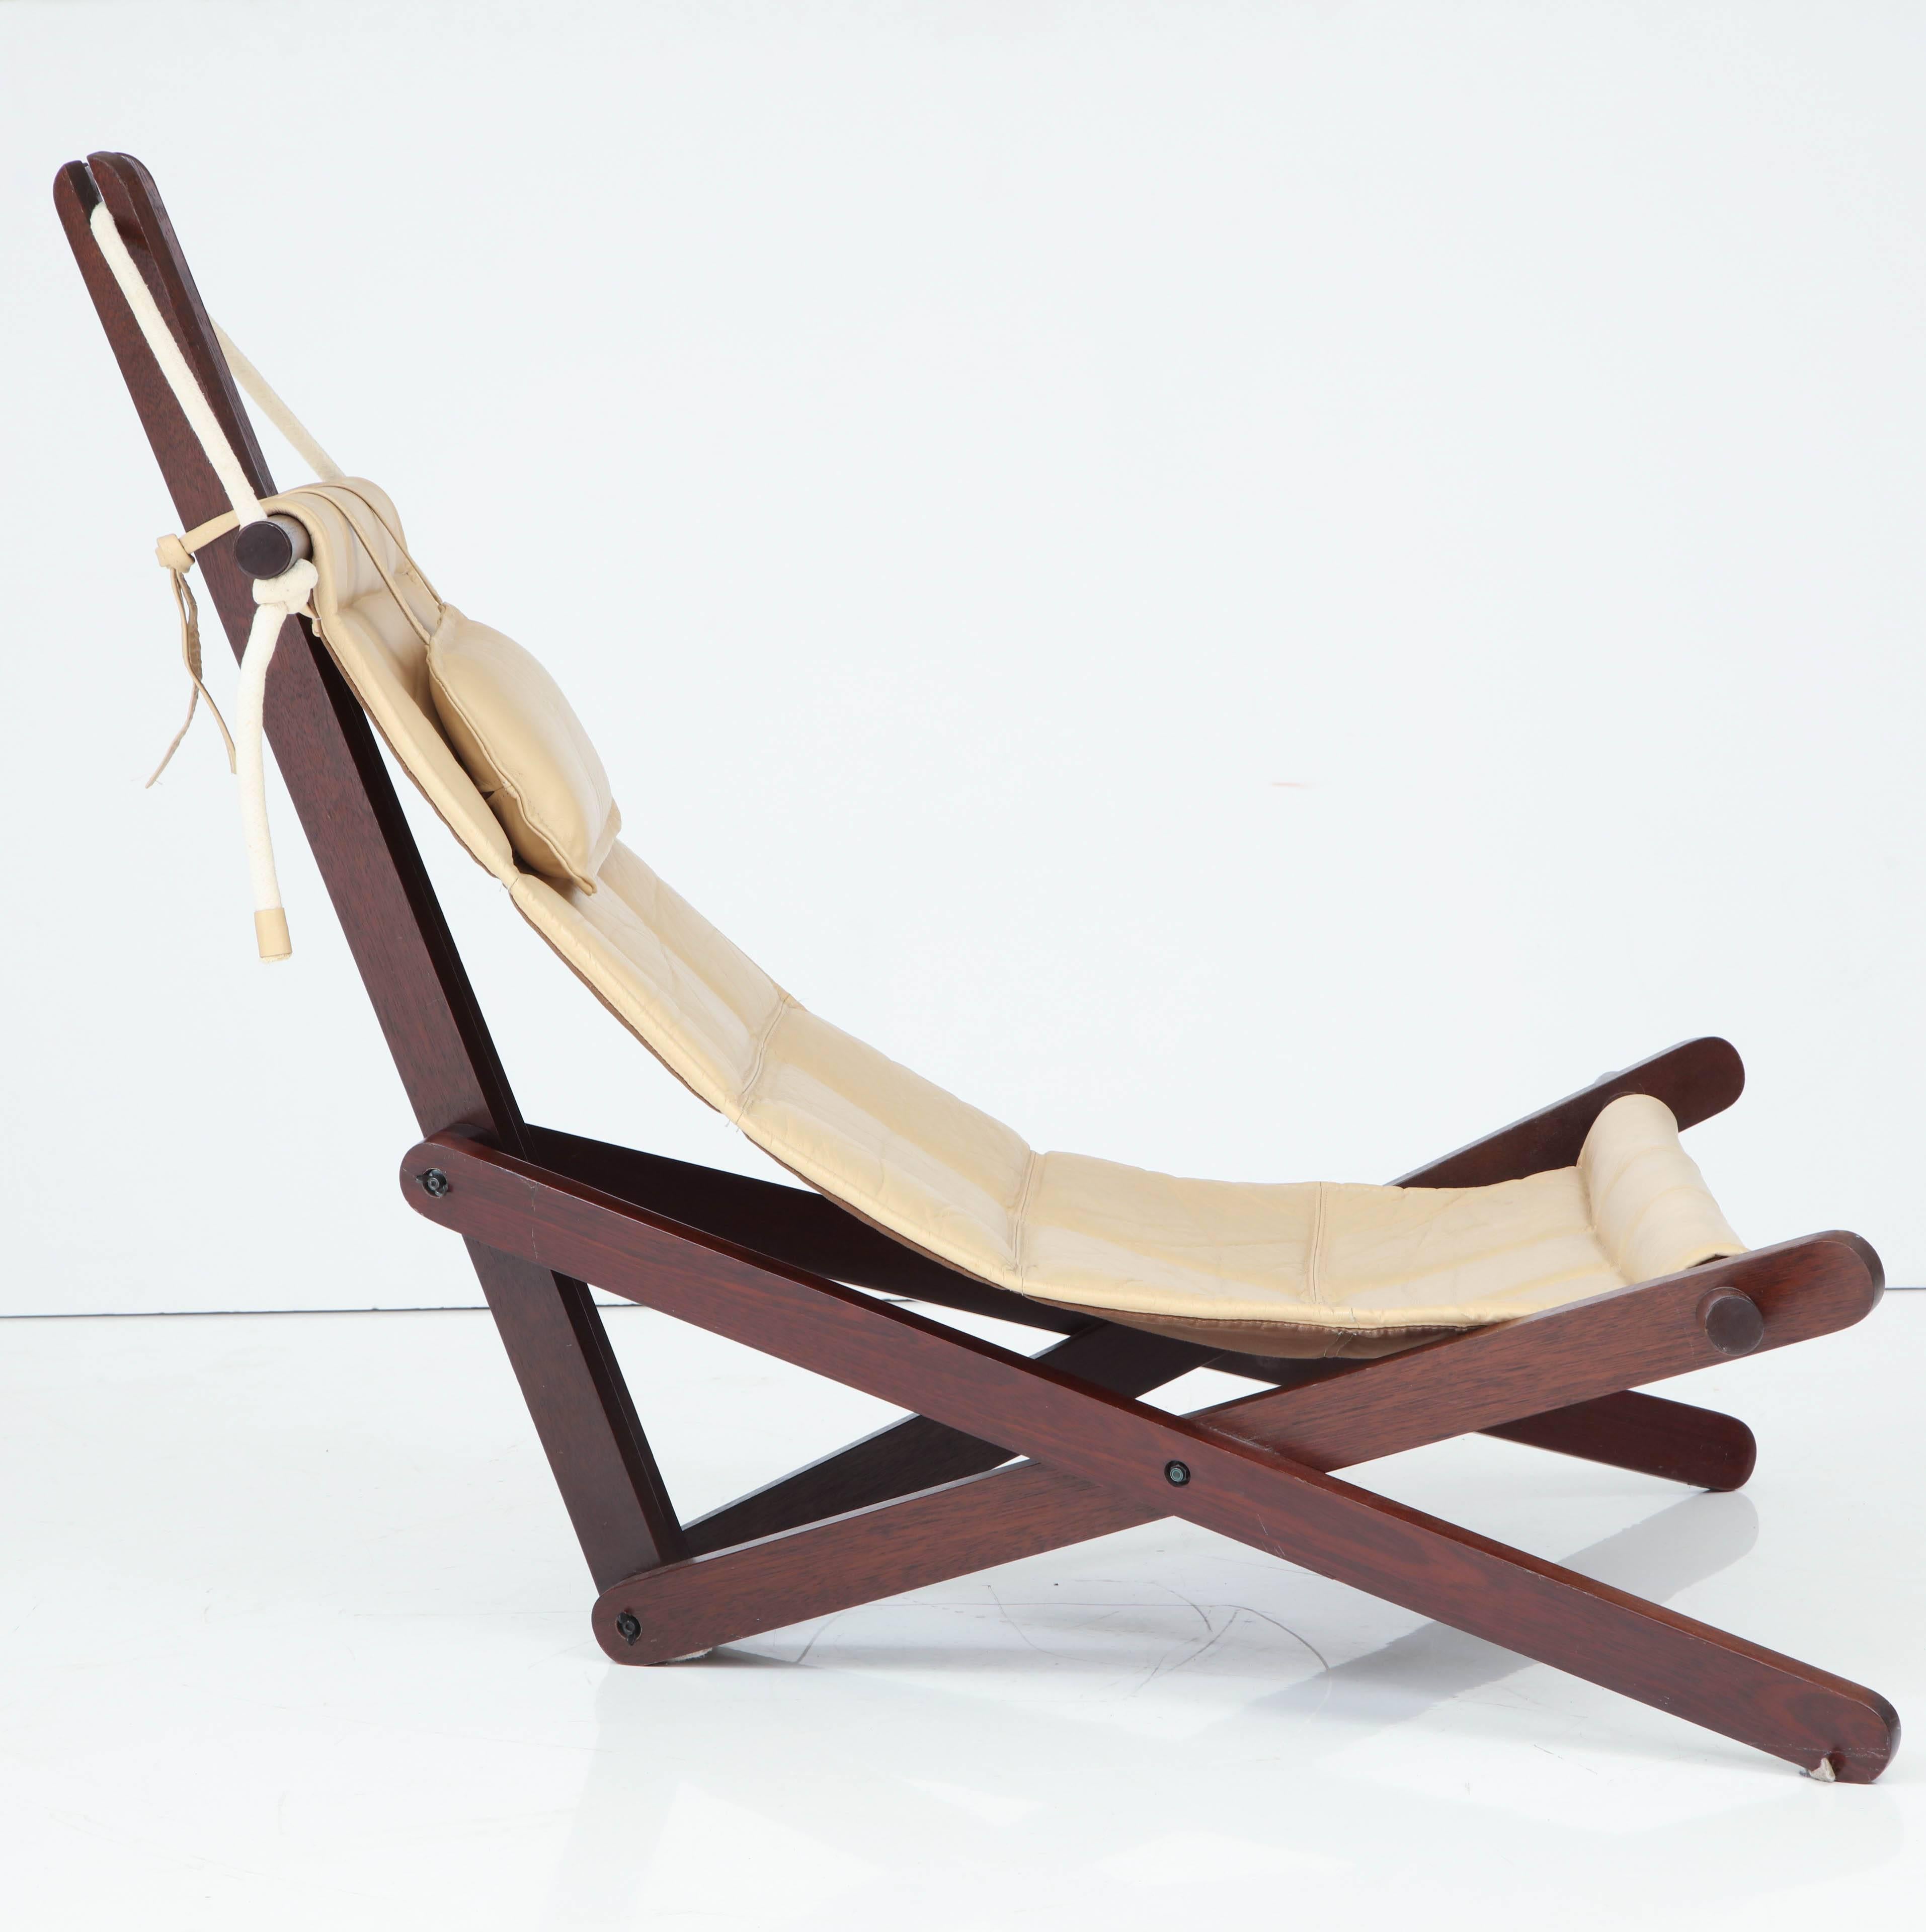 Intricate designed cream colored leather and jatoba wood sling chair by English Architect Dominic Michaelis called the 